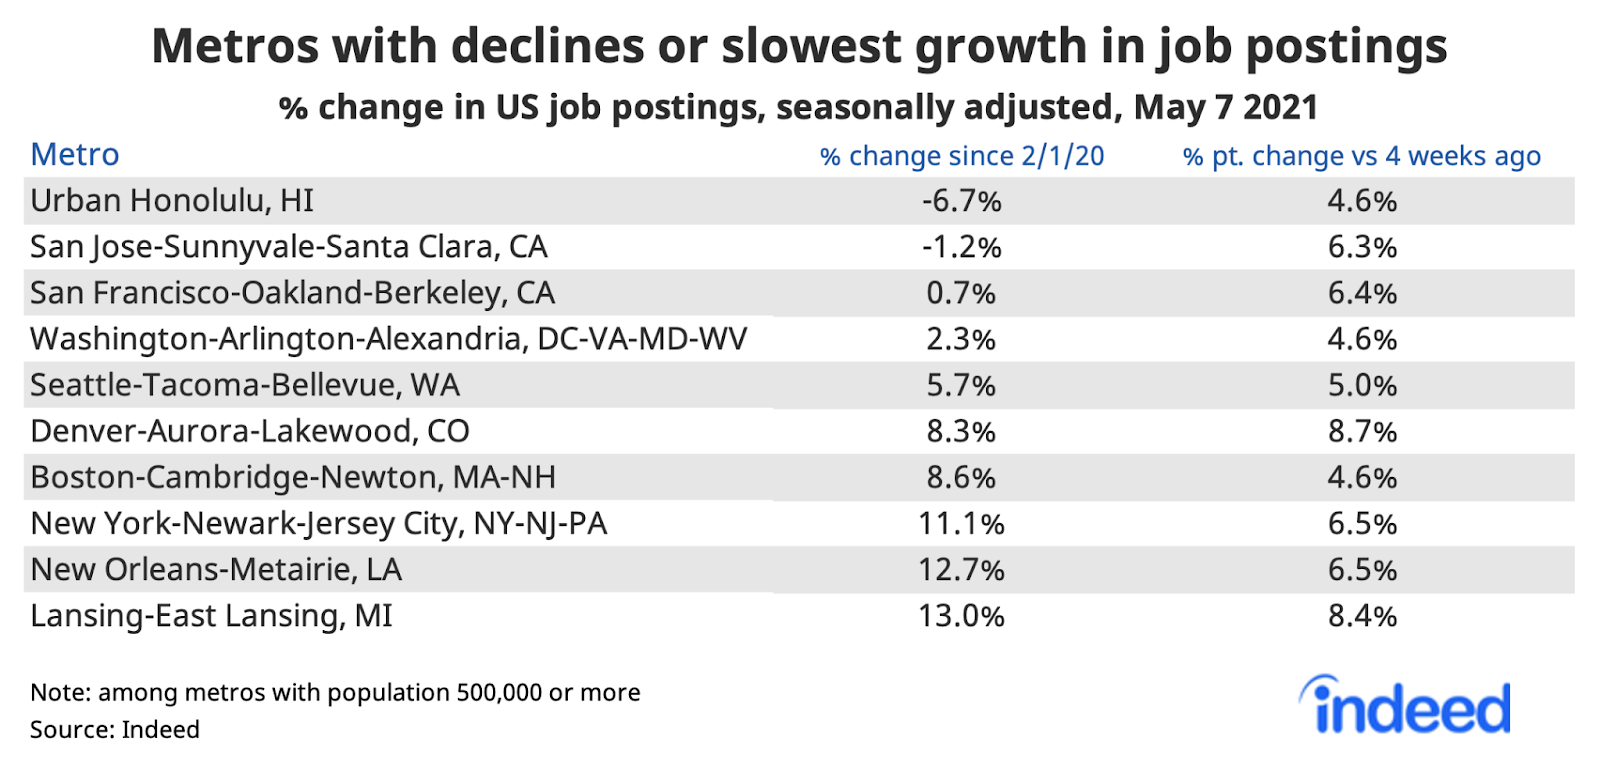 Table titled “Metros with declines or slowest growth in job postings.” 